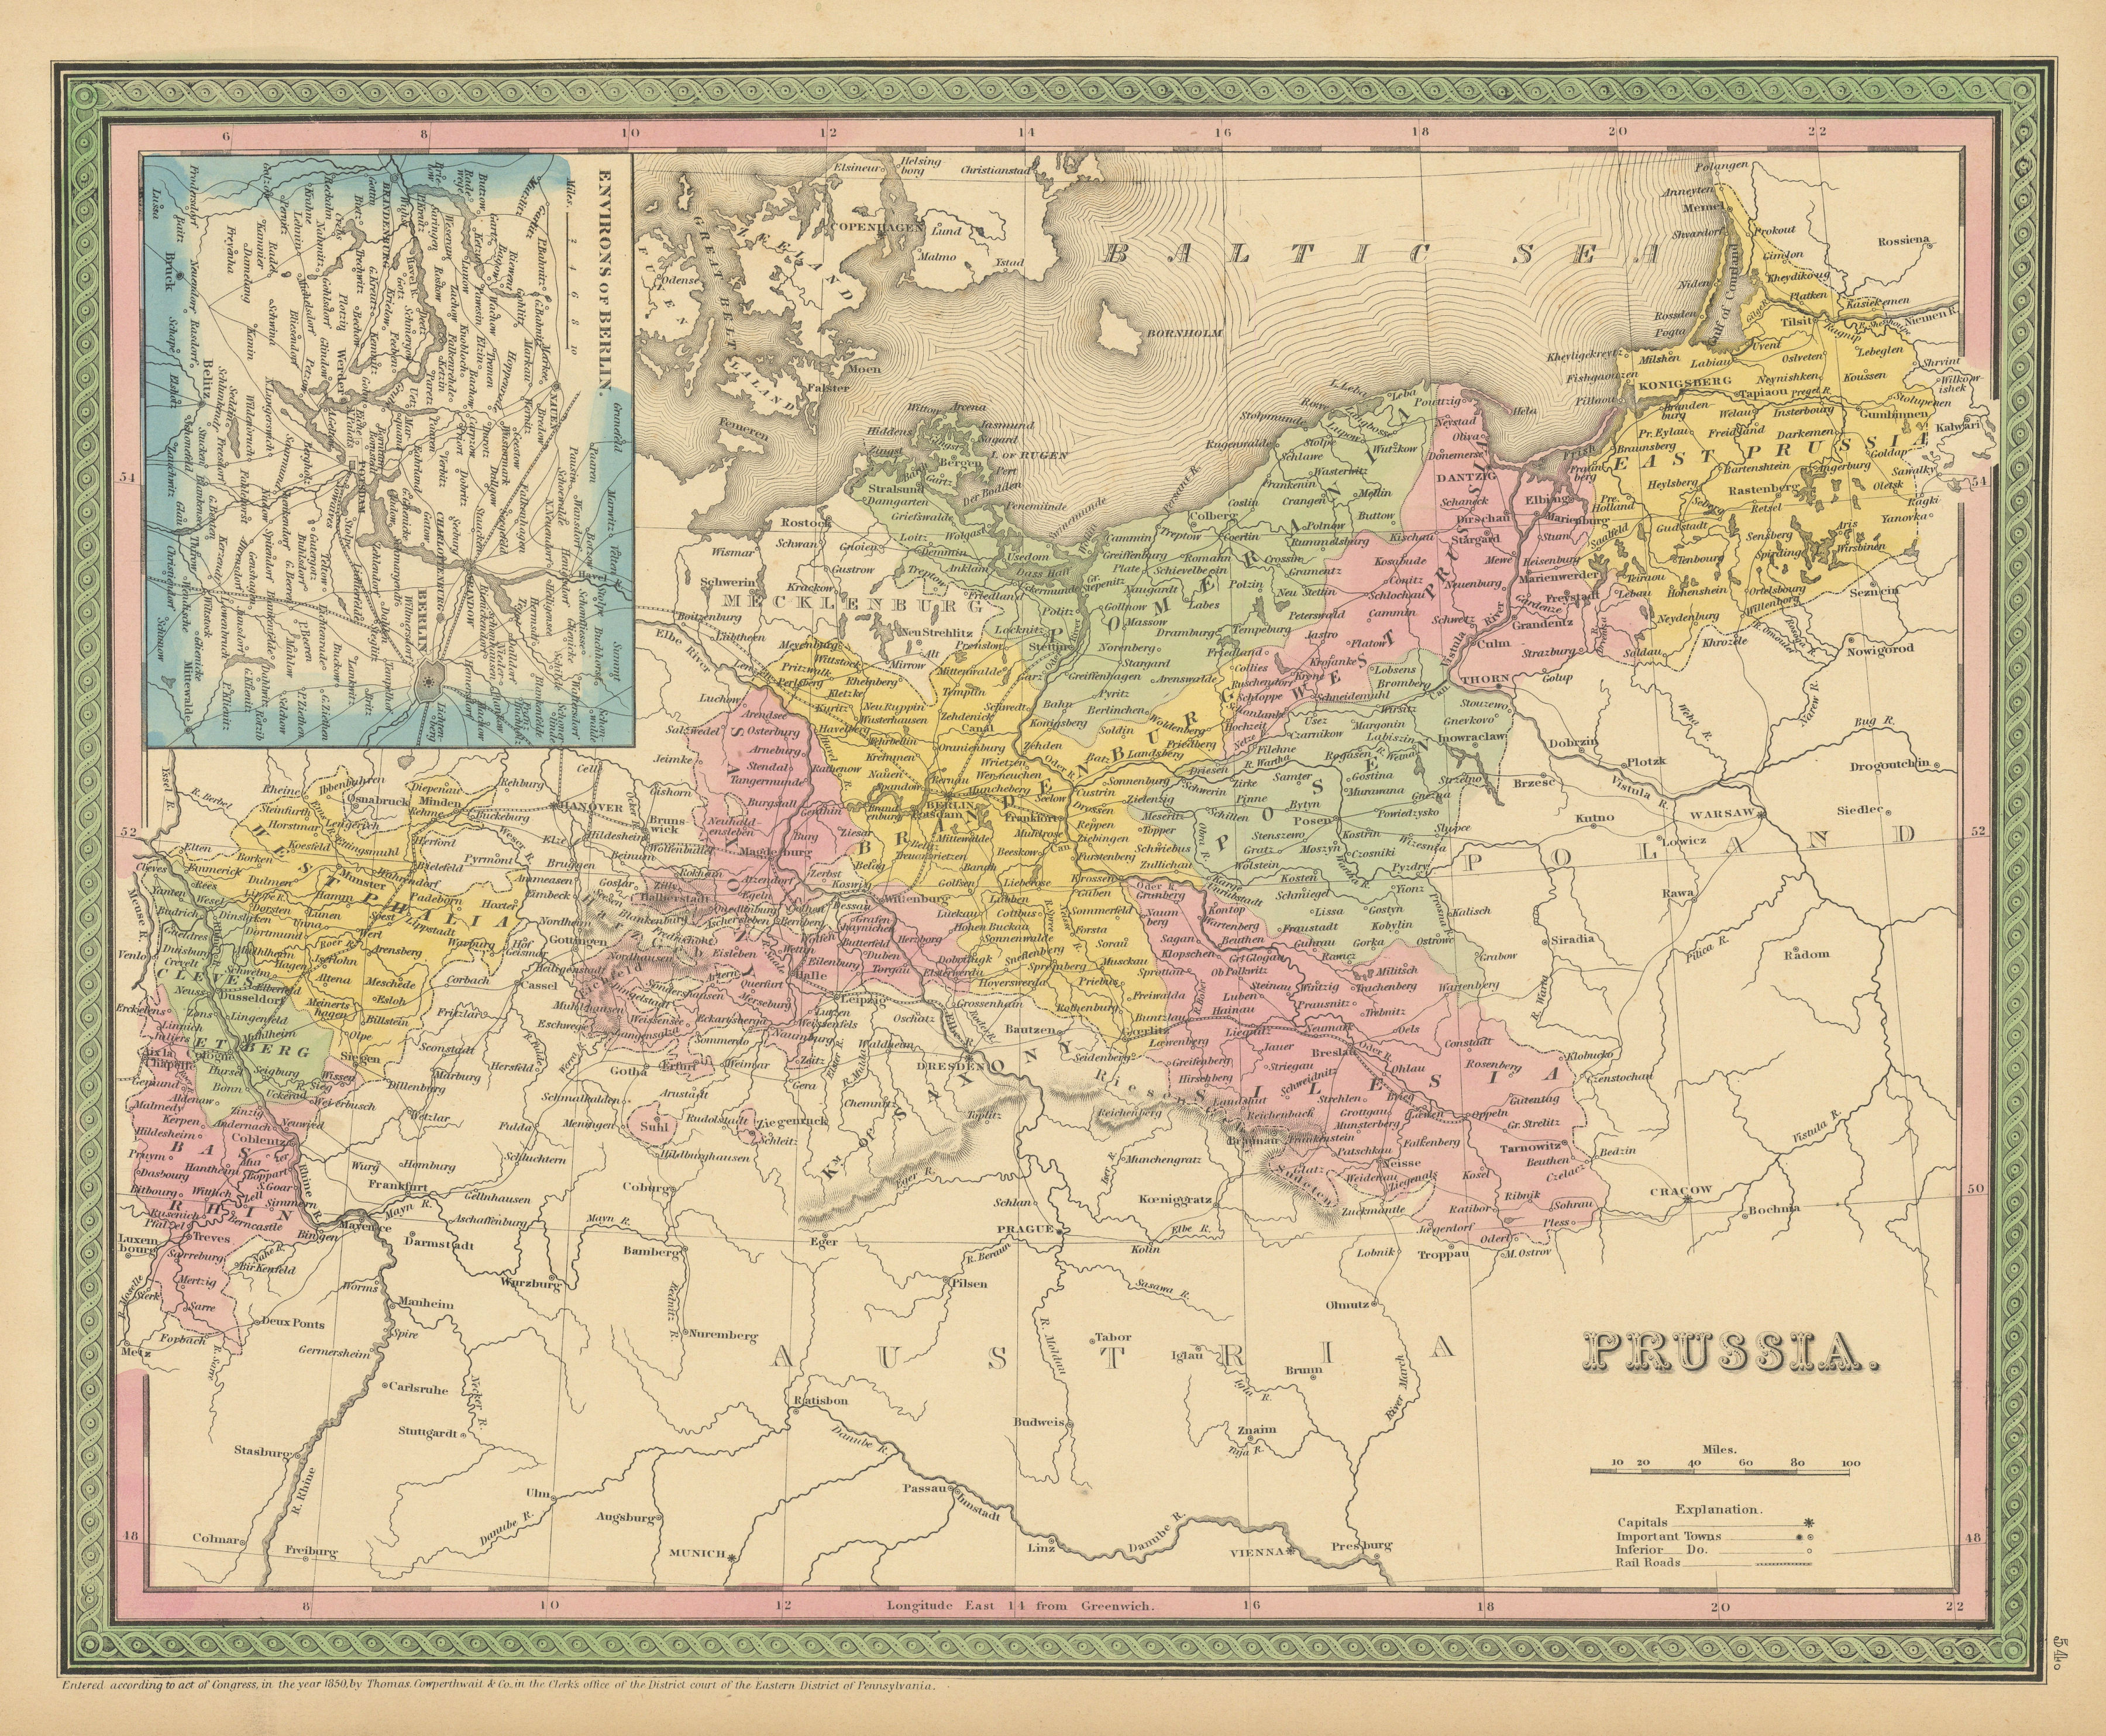 Prussia. Berlin environs. Germany & Poland. THOMAS, COWPERTHWAIT 1852 old map